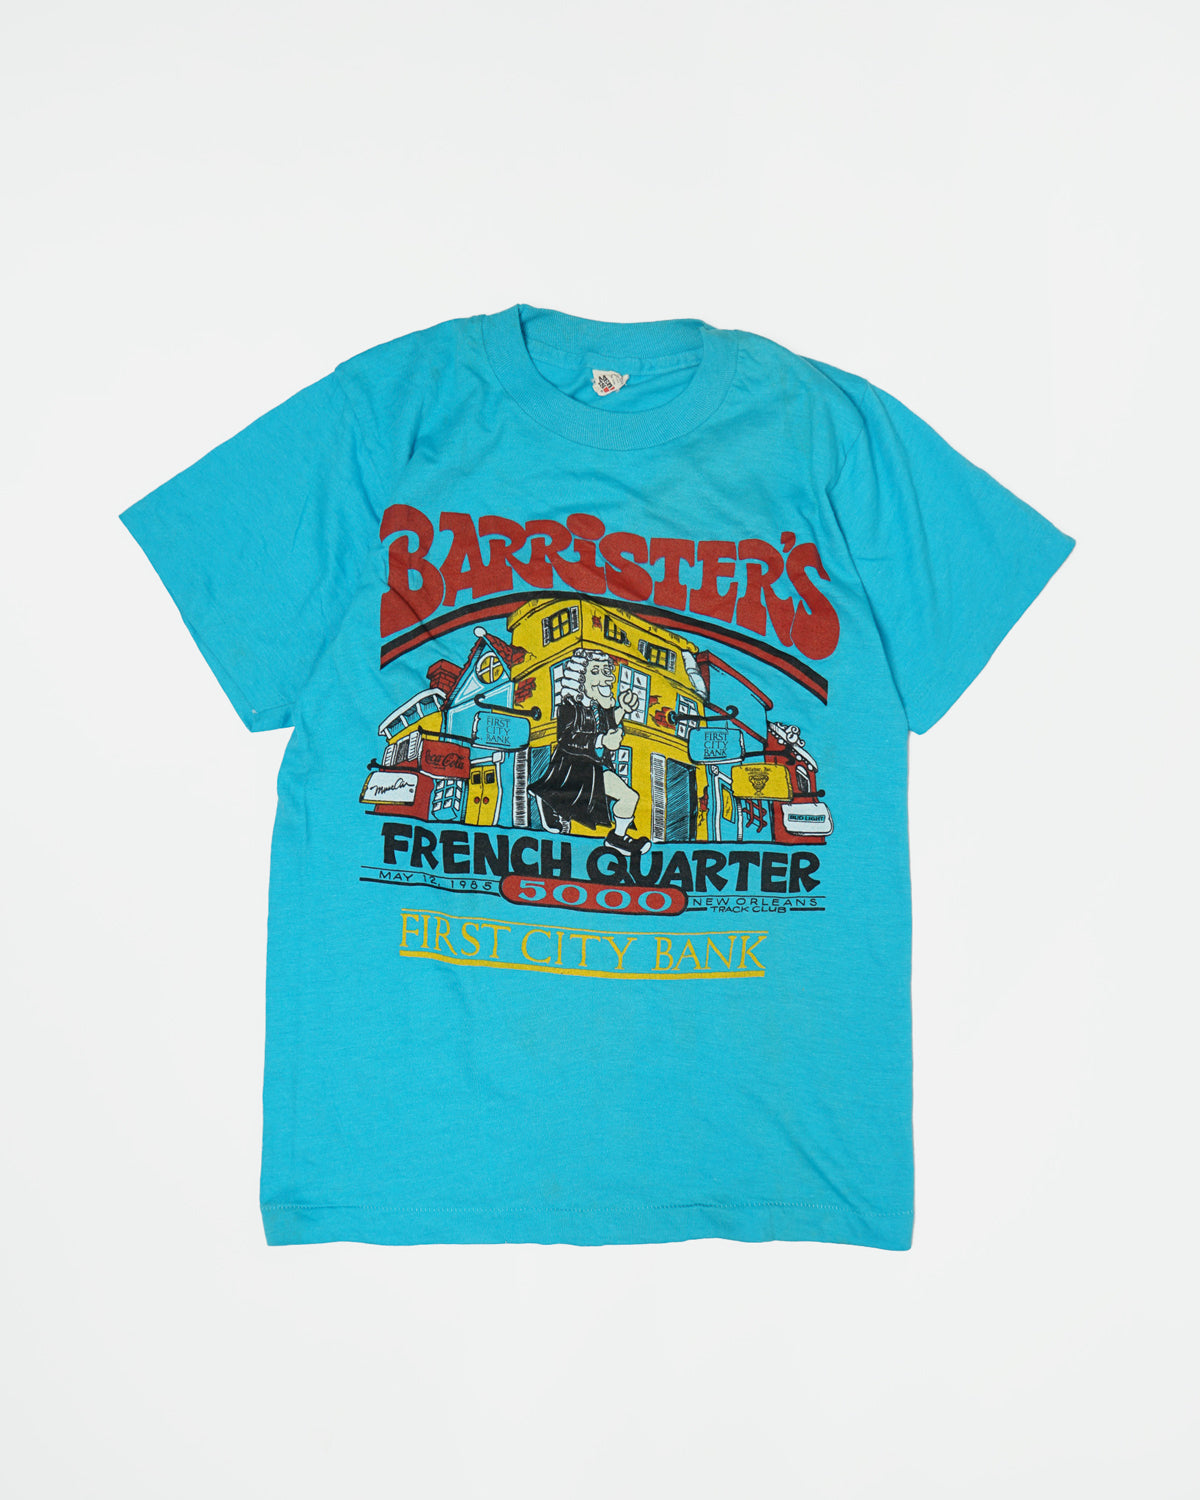 Graphic Tee / Barrister's First City Bank